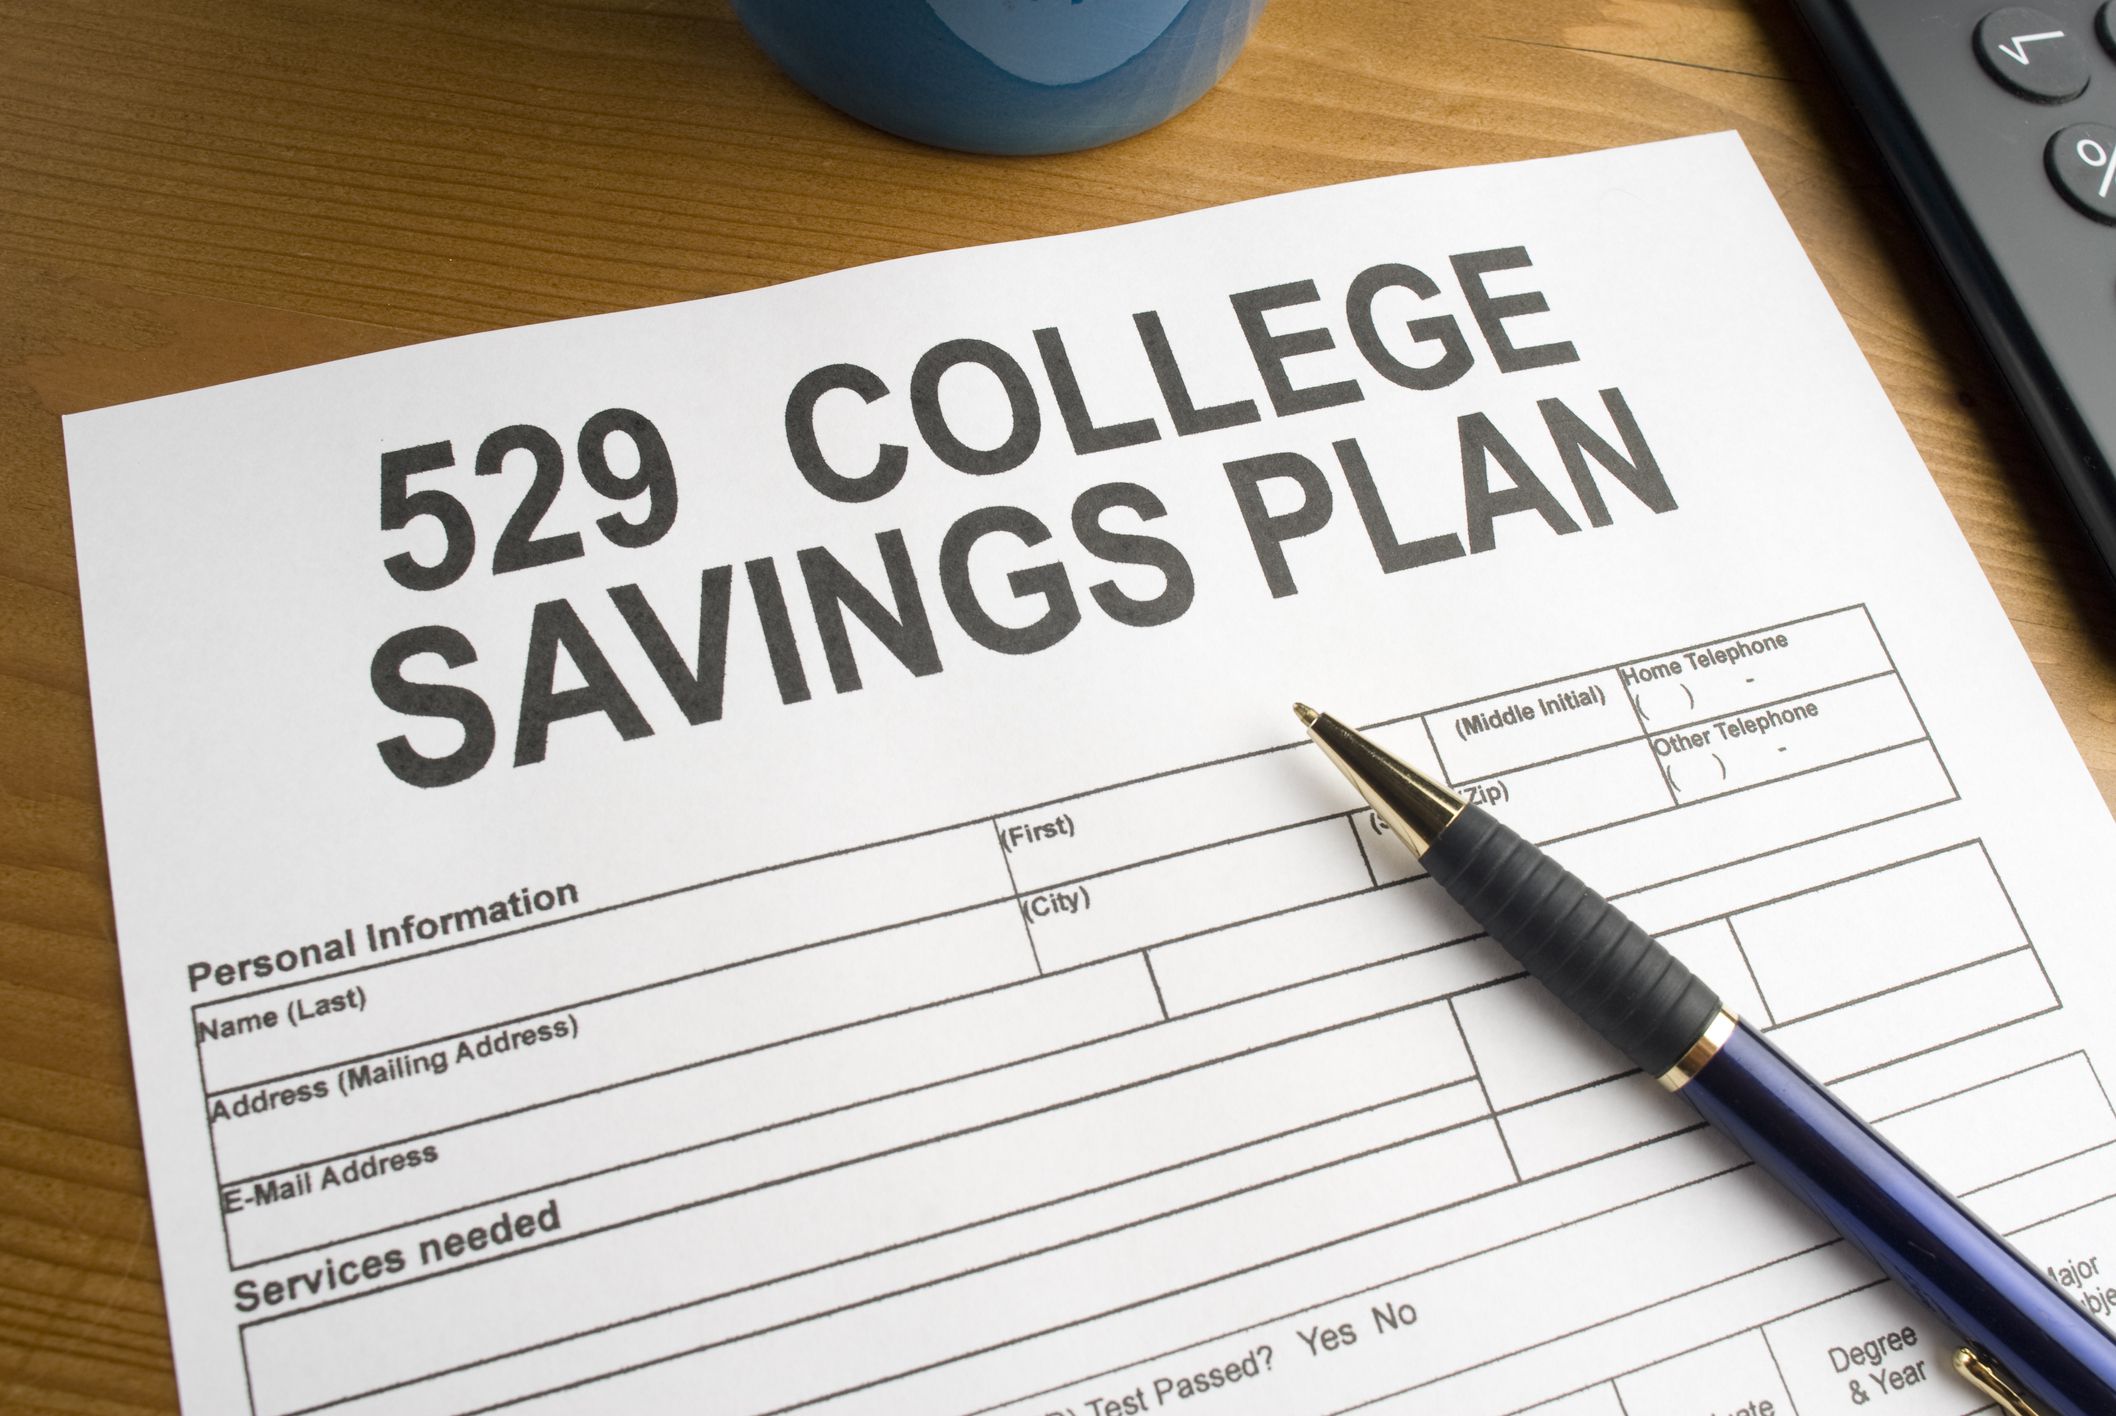 529 College Savings Plans - What Are They and What Are Their Benefits? - 1